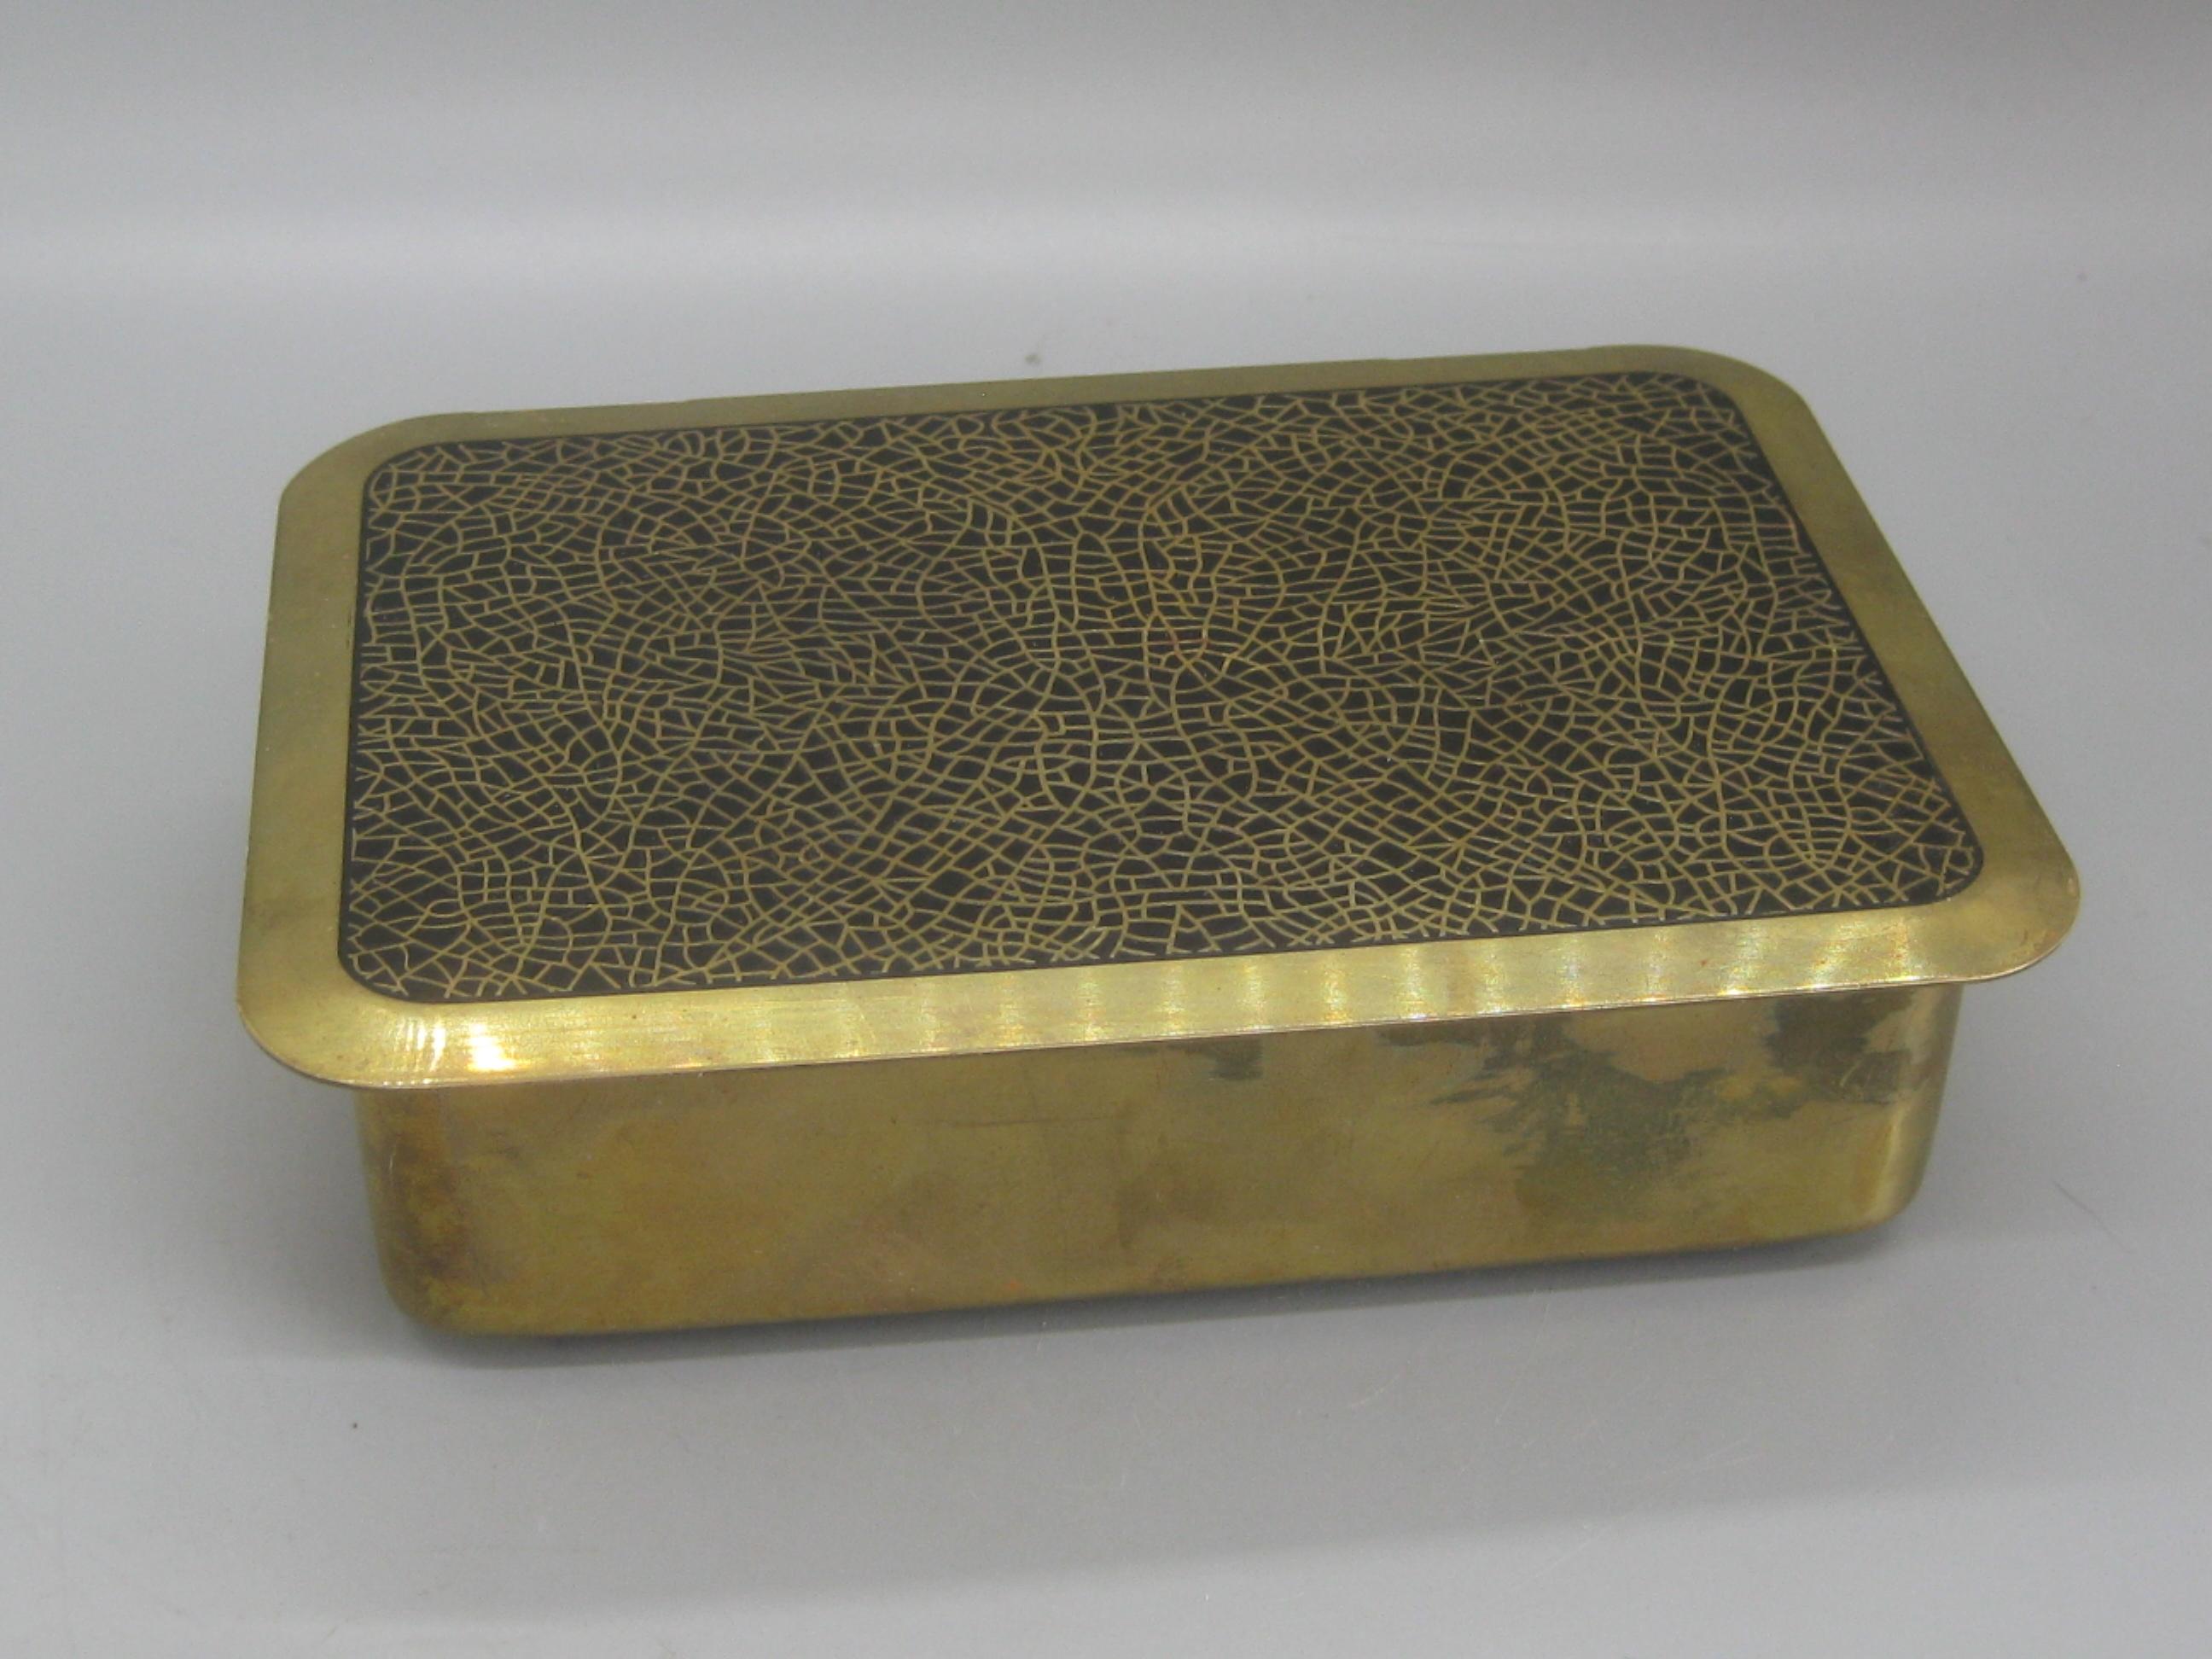 Beautiful Art Deco brass and black enamel desk stash/jewelry trinket box. Top has a wonderful crackle pattern with black enamel inlay. Made of brass and has wooden inserts. Brass has a wonderful patina and can be polished if desired. The top design